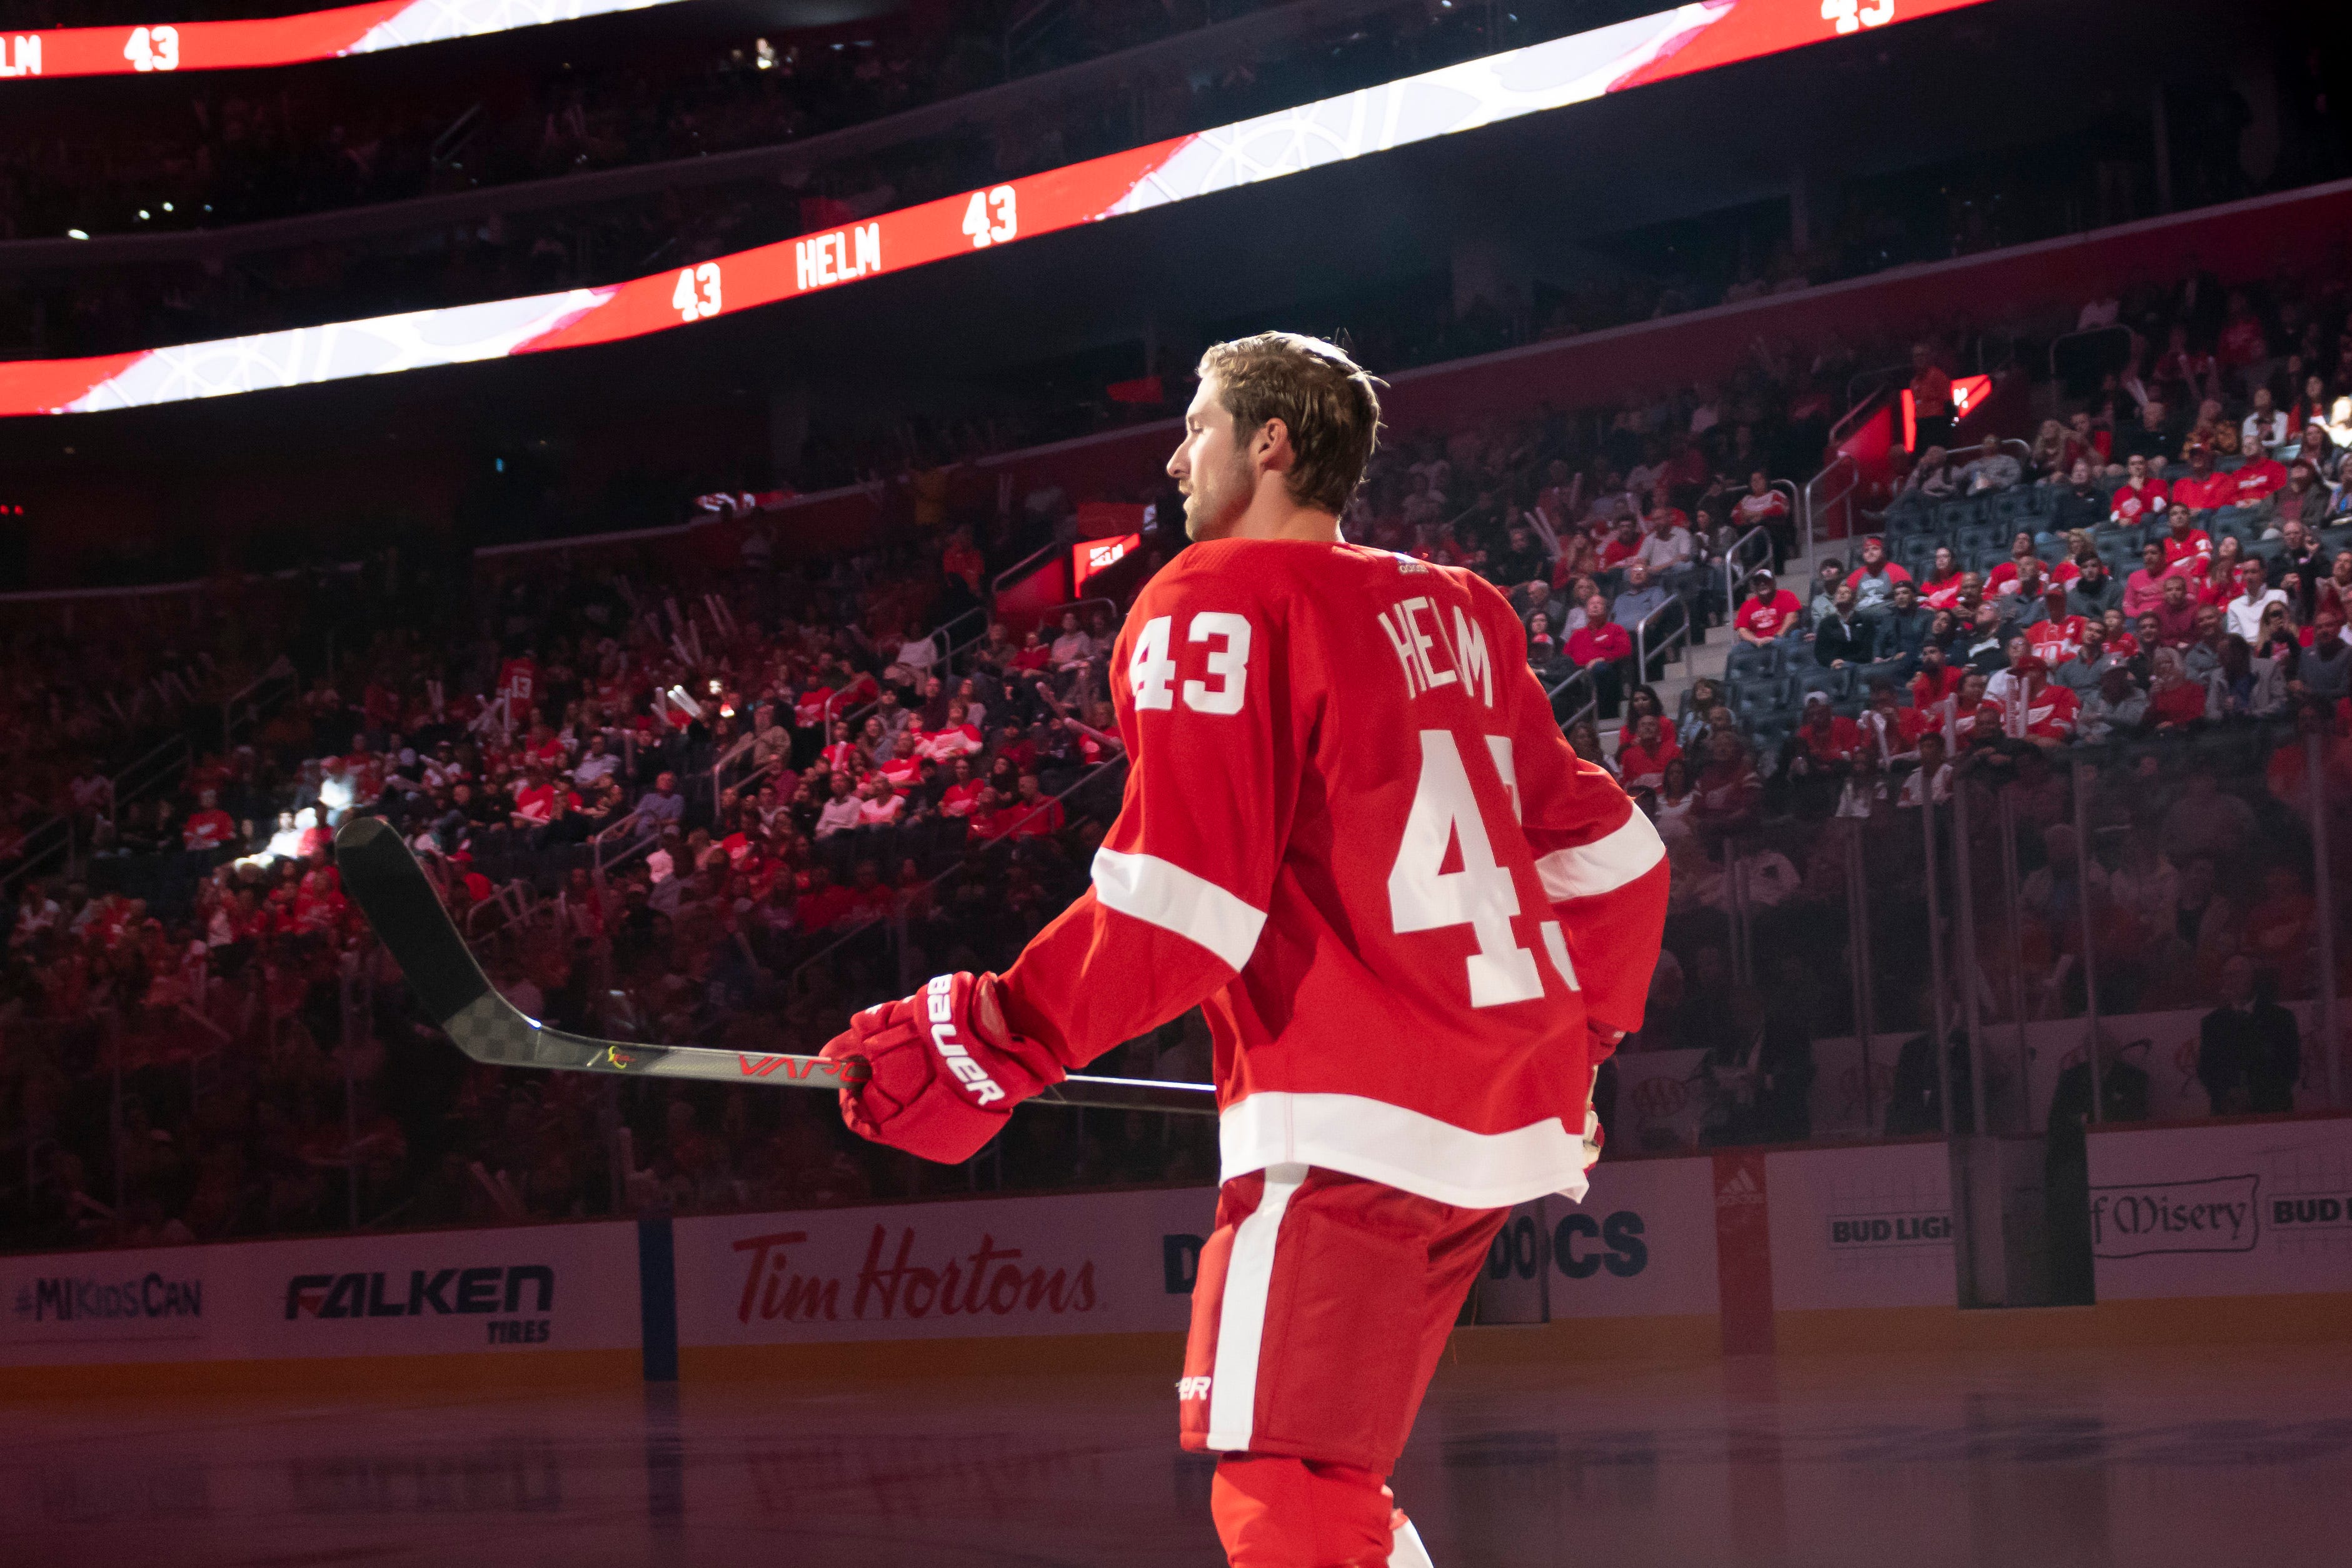 Darren Helm – AGE: 33. CONTRACT: Ends 2021, $3.85 million per: STATS: 68 games, 9 goals, 7 assists. COMMENT: Helm rebounded with one of the better seasons of any Wings forward, and still plays with speed. Helm could be a marketable chip at next season’s deadline. GRADE: B-minus.